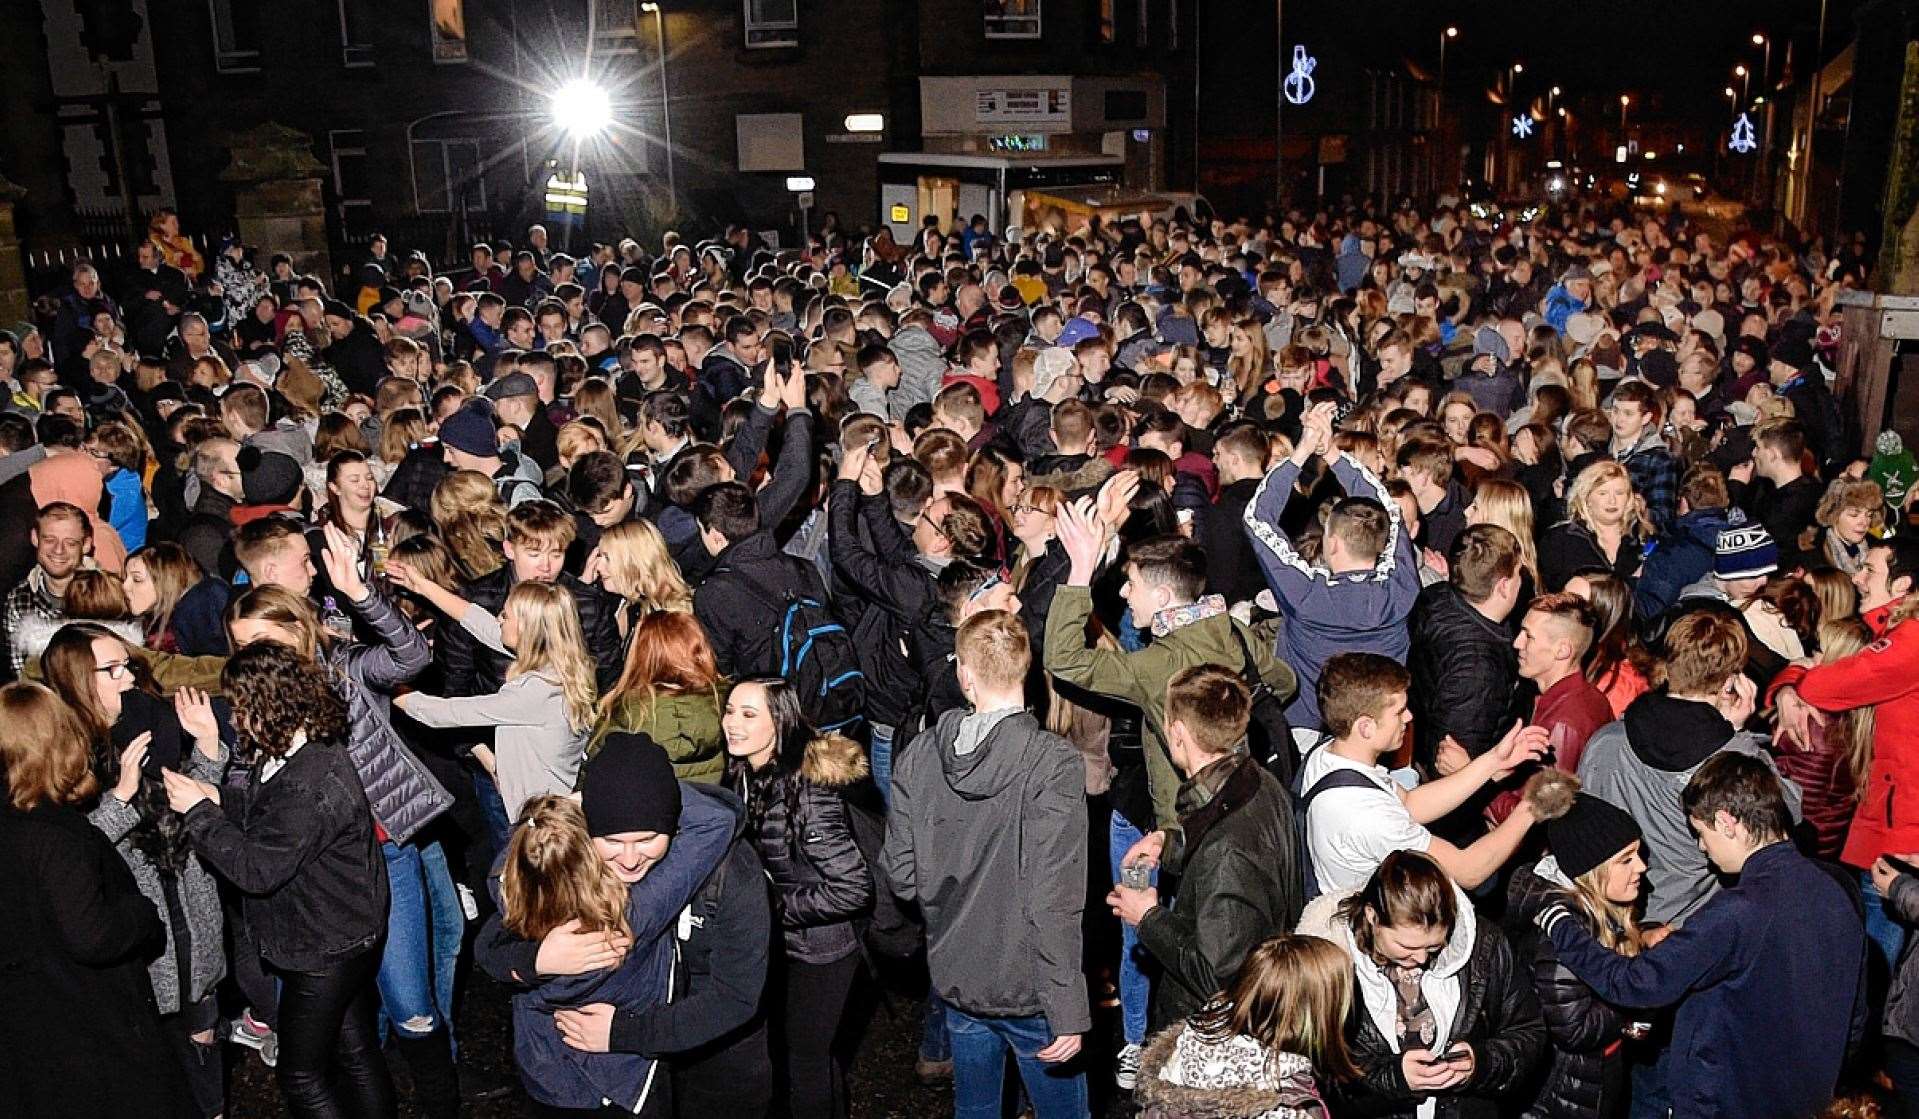 There were an estimated 1500 revellers at Thurso's street party on Hogmanay in 2017. Picture: Mel Roger